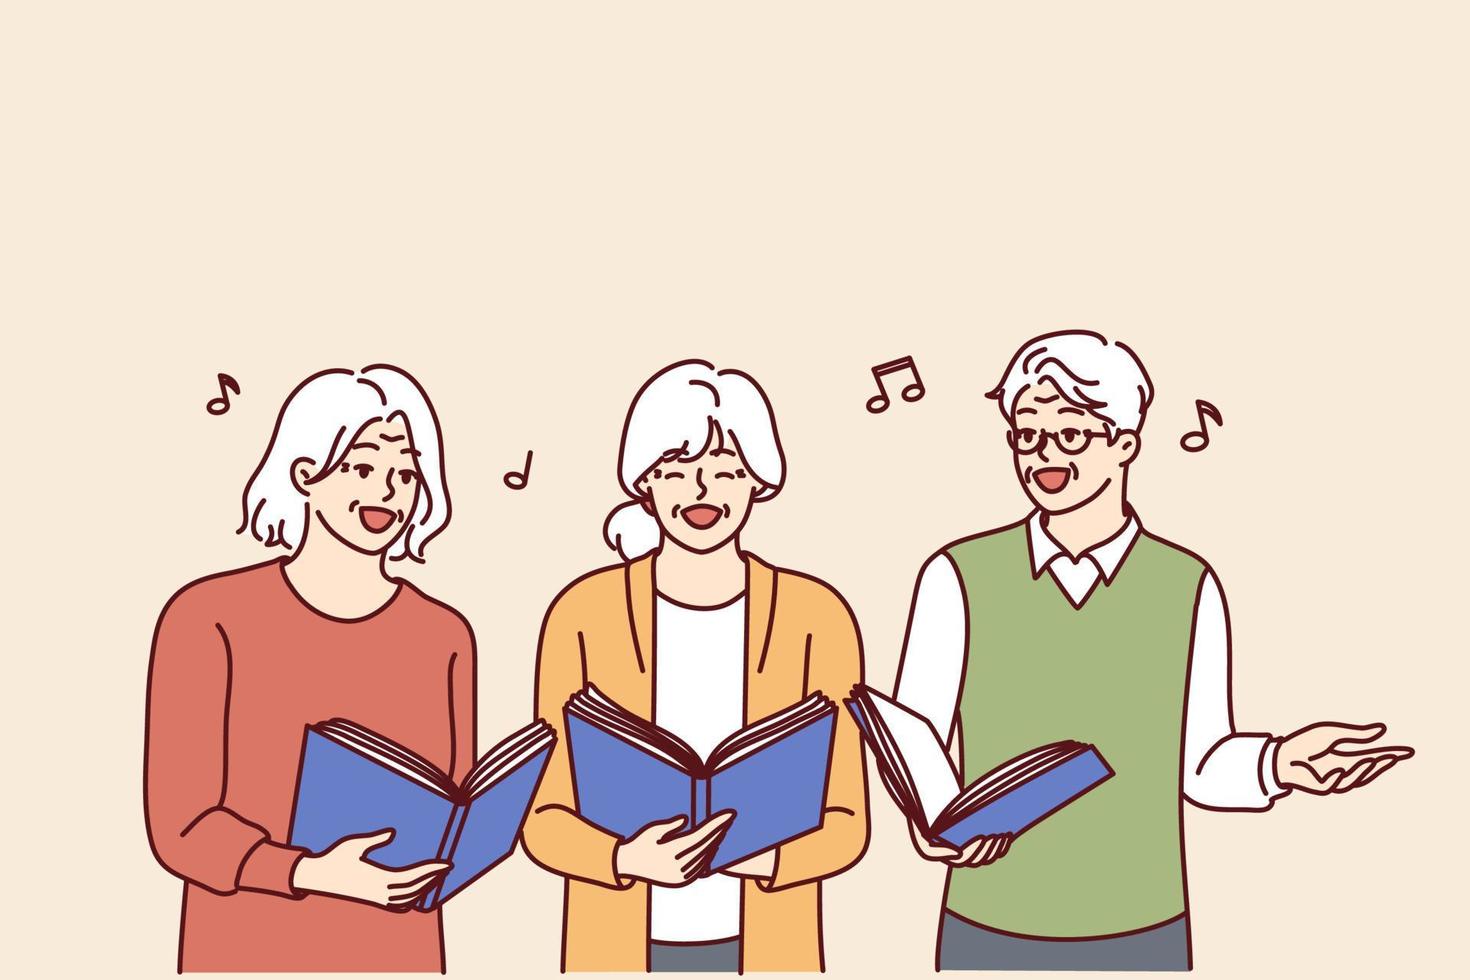 Chorus elderly men and women with workbooks in hands singing song together and enjoying old age. Gray-haired people from ensemble sing doing favorite hobby or giving musical concert vector